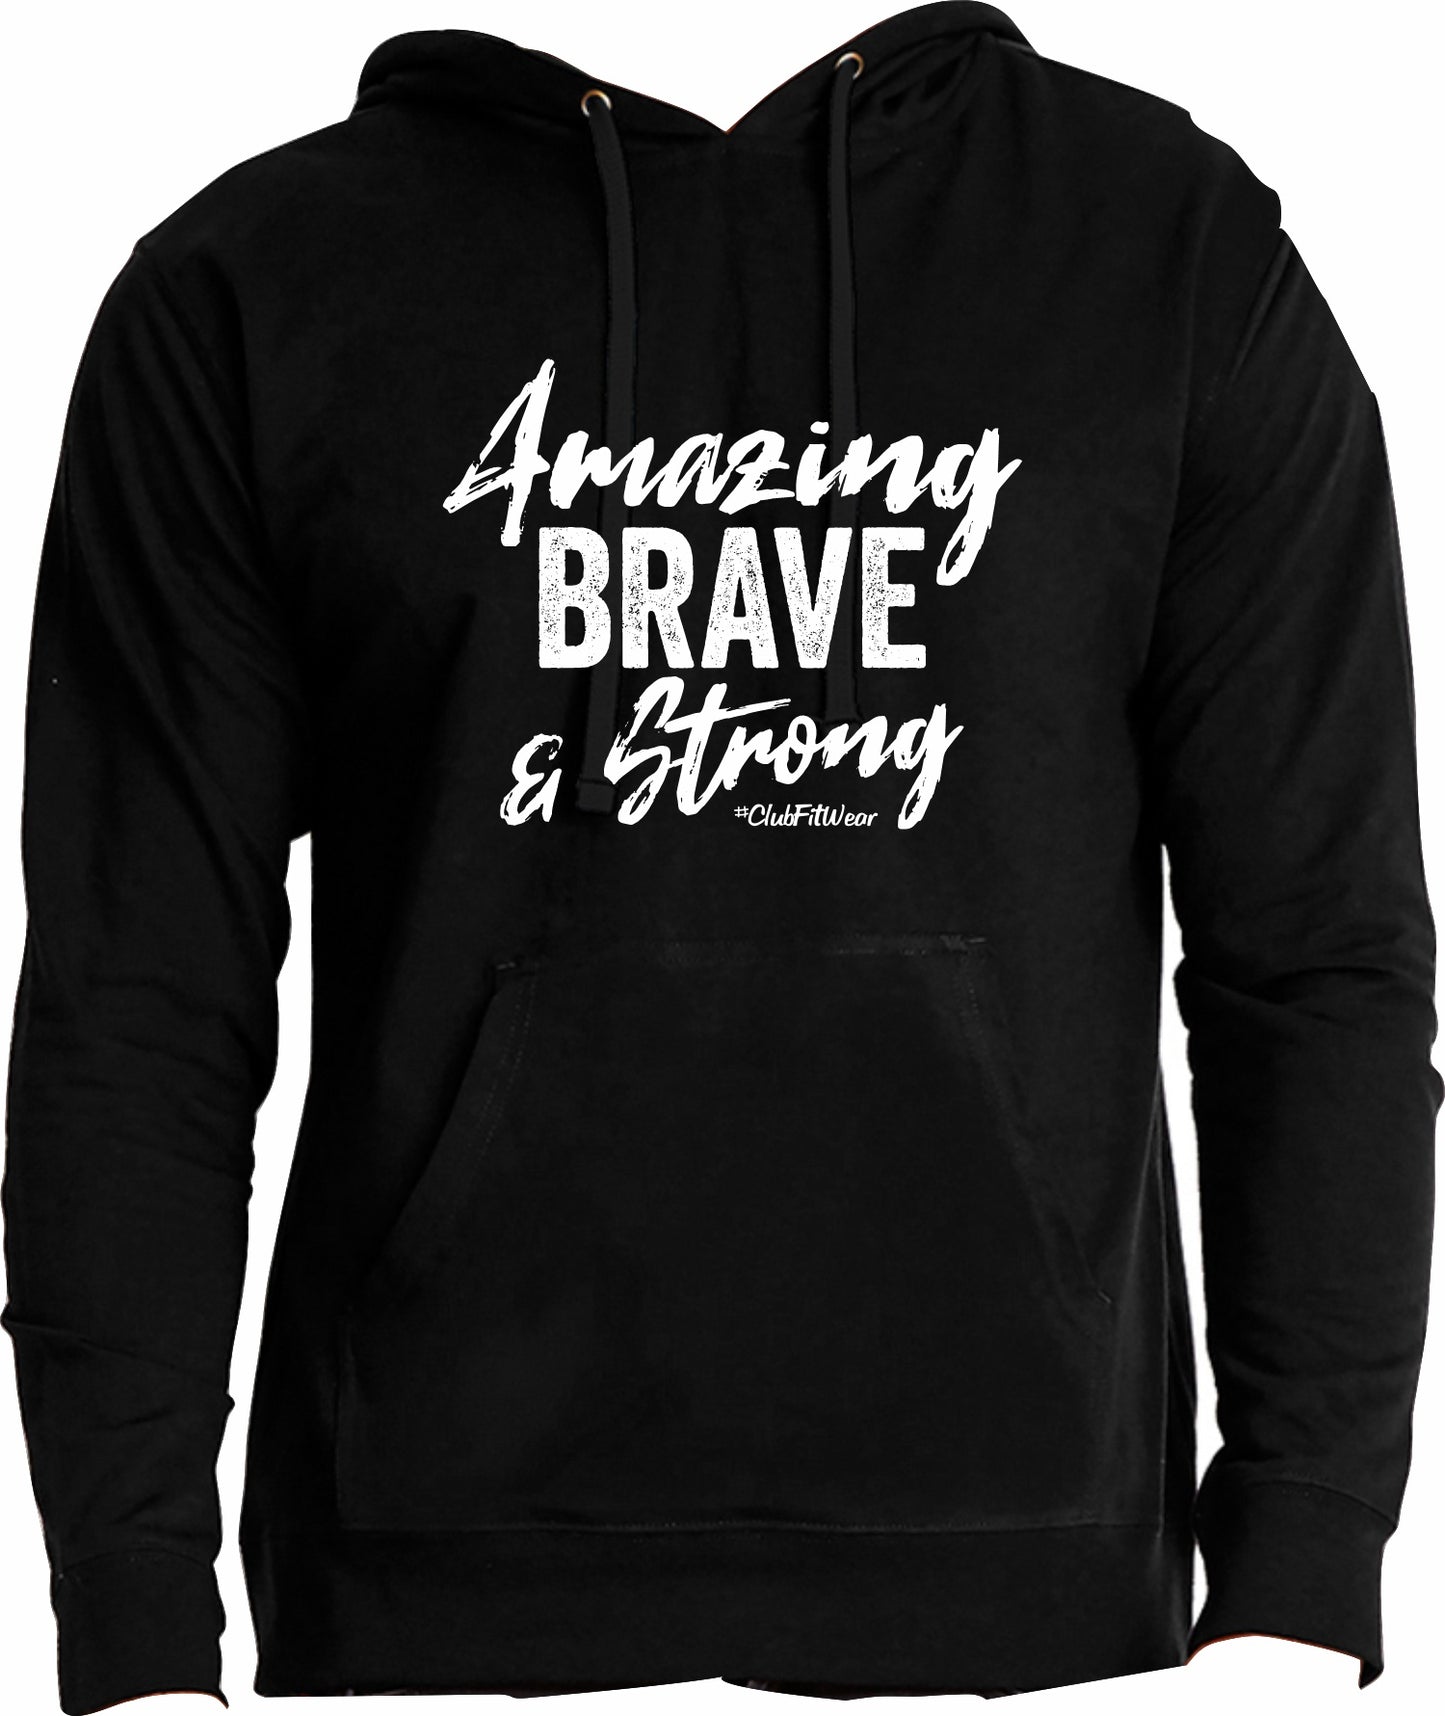 Amazing Brave & Strong - Hoodie